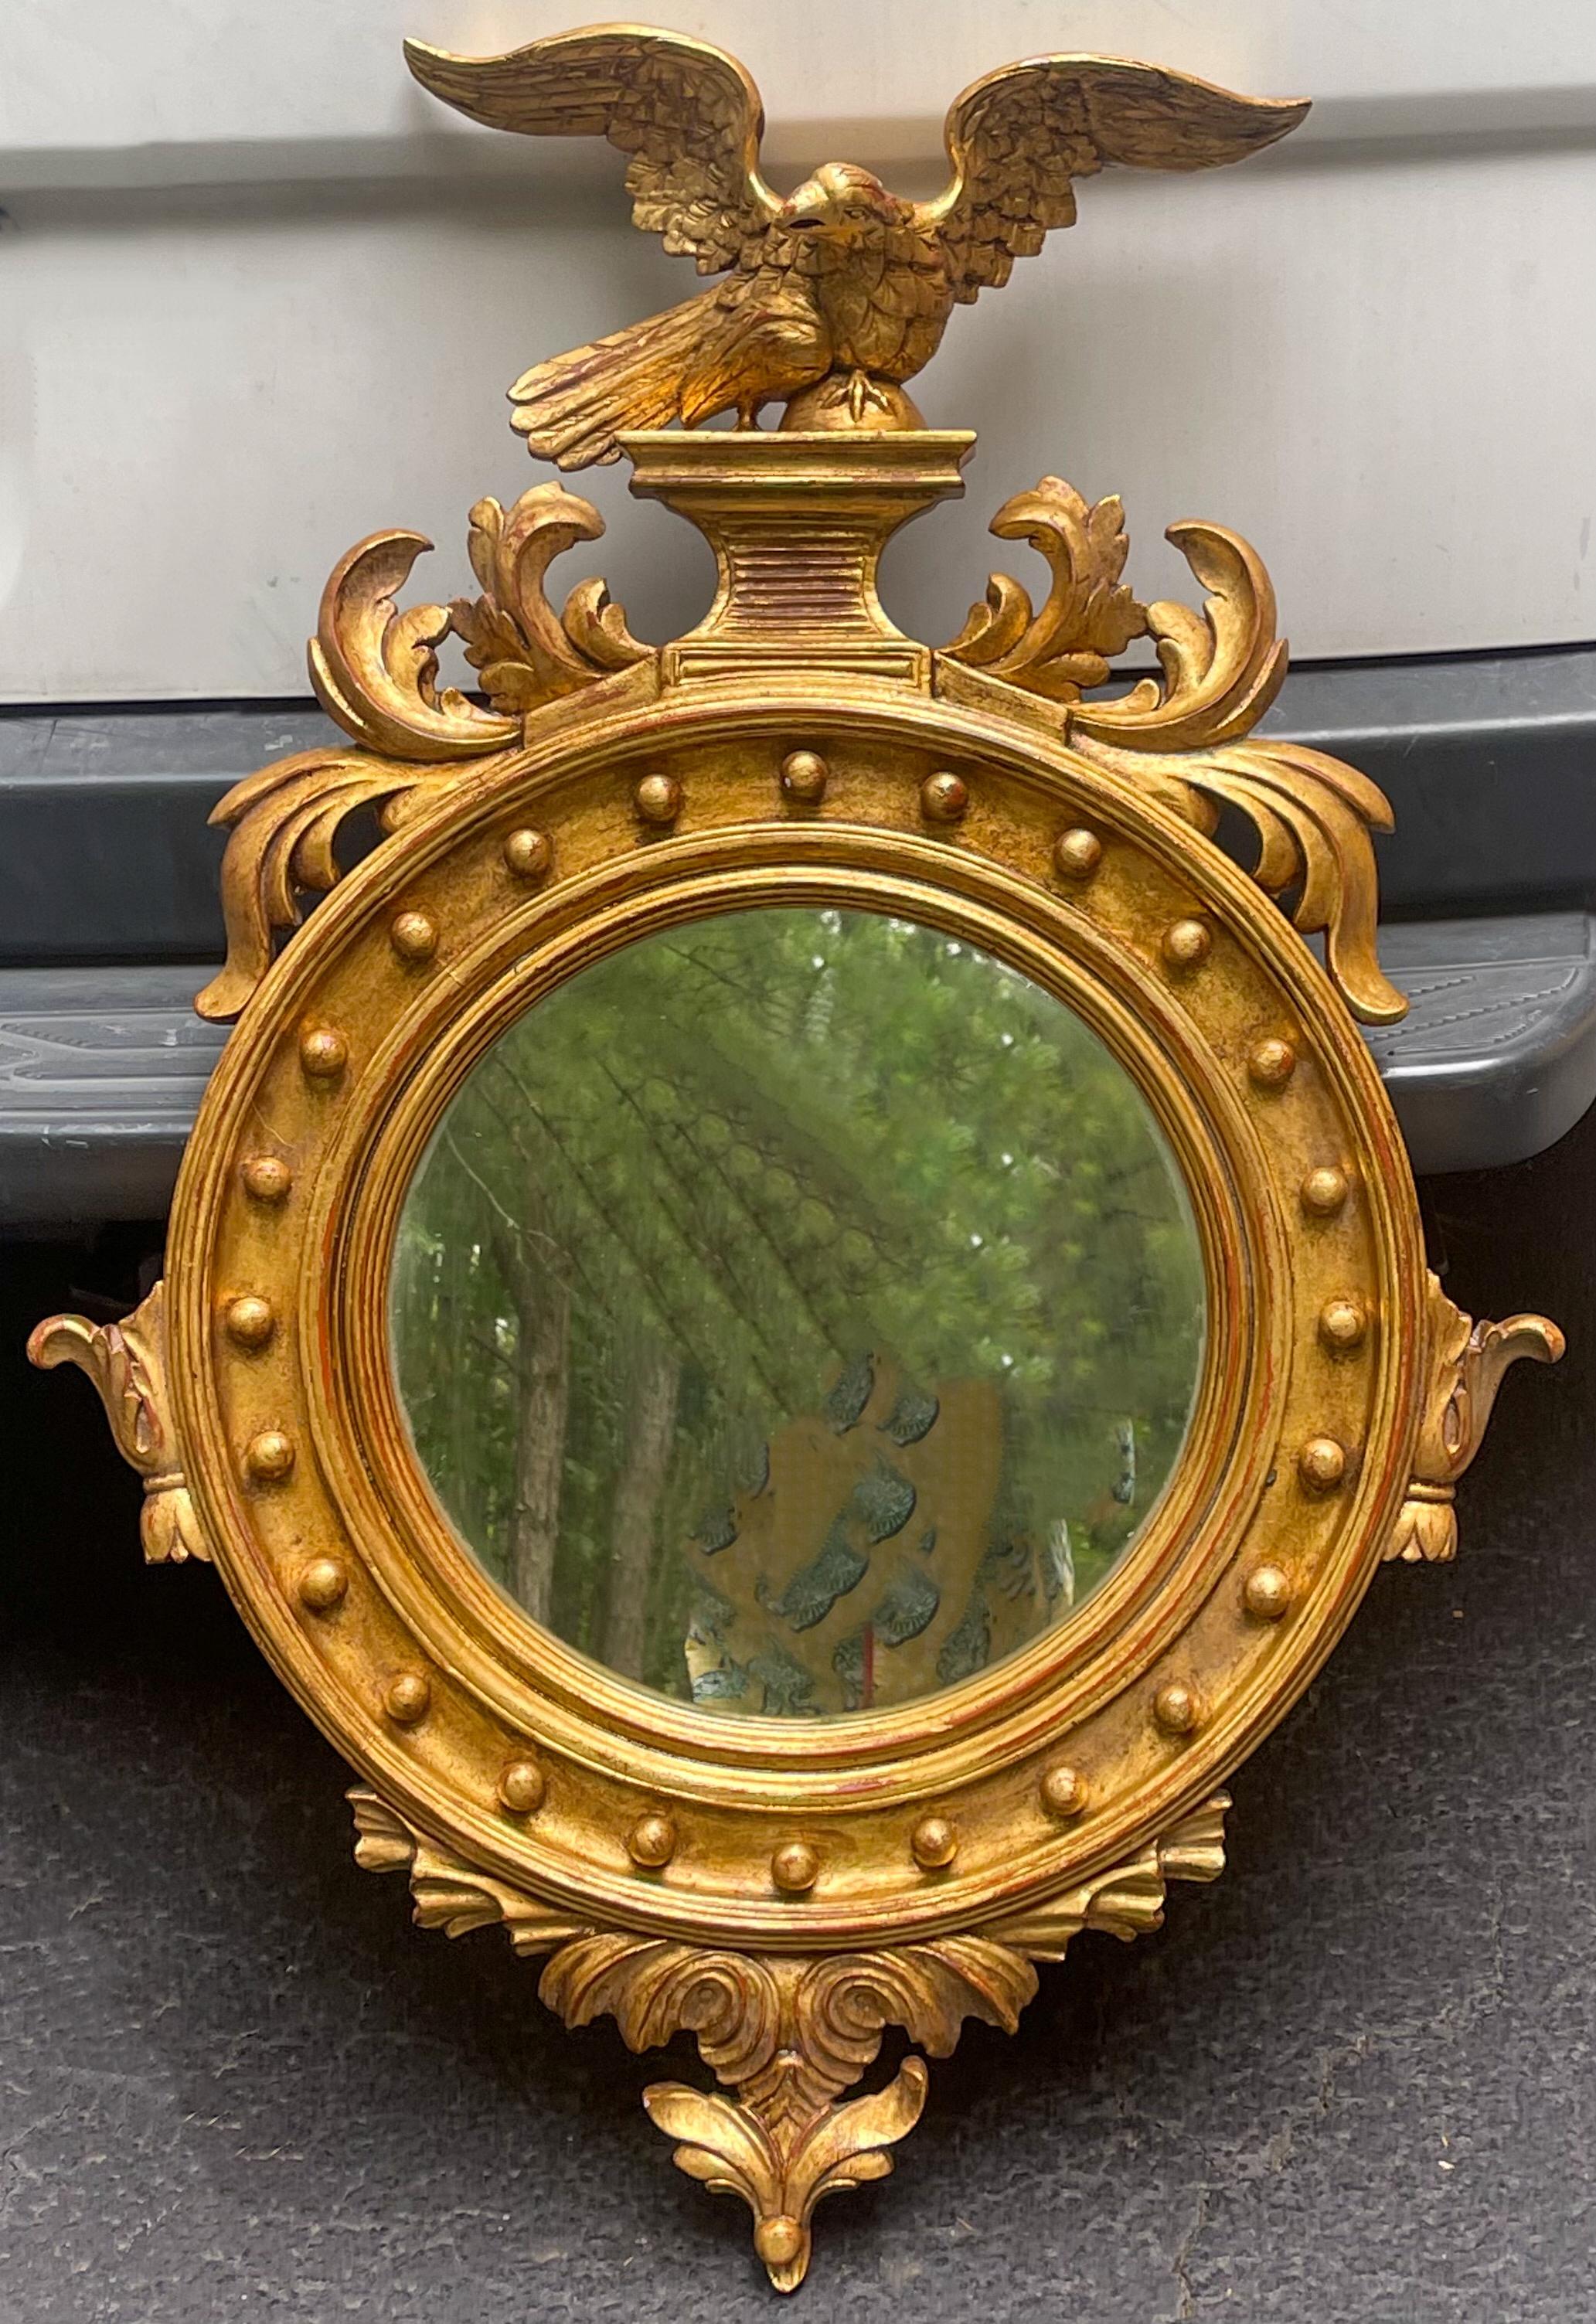 This is a pair of carved giltwood eagle mirrors with Federal styling in very good condition. They are Italian and most likely date to the 60s. The pair are unmarked.